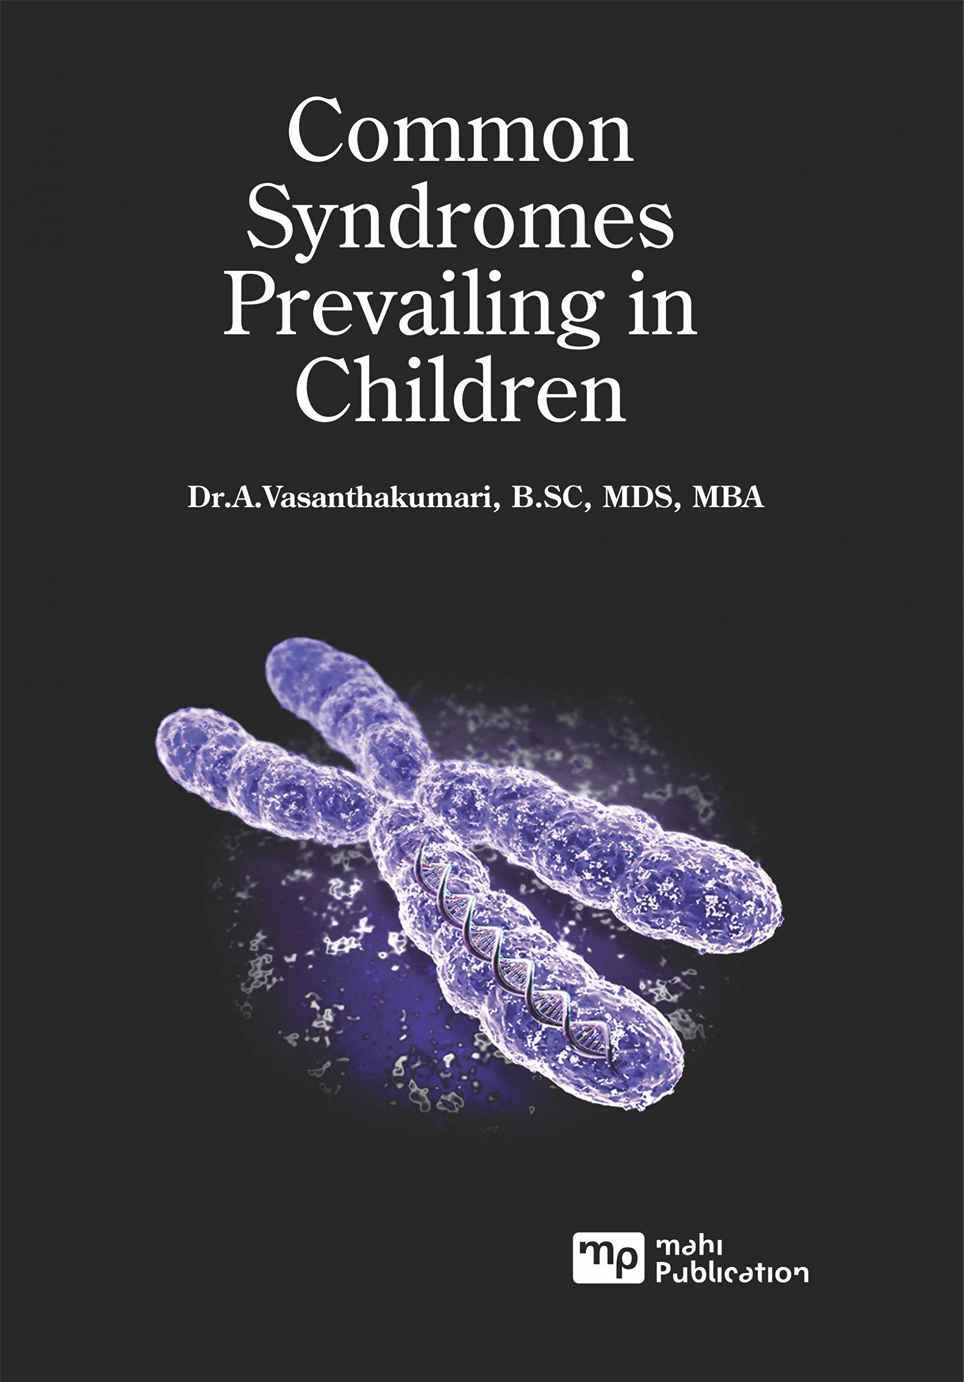 Common Syndromes Prevailing in Children